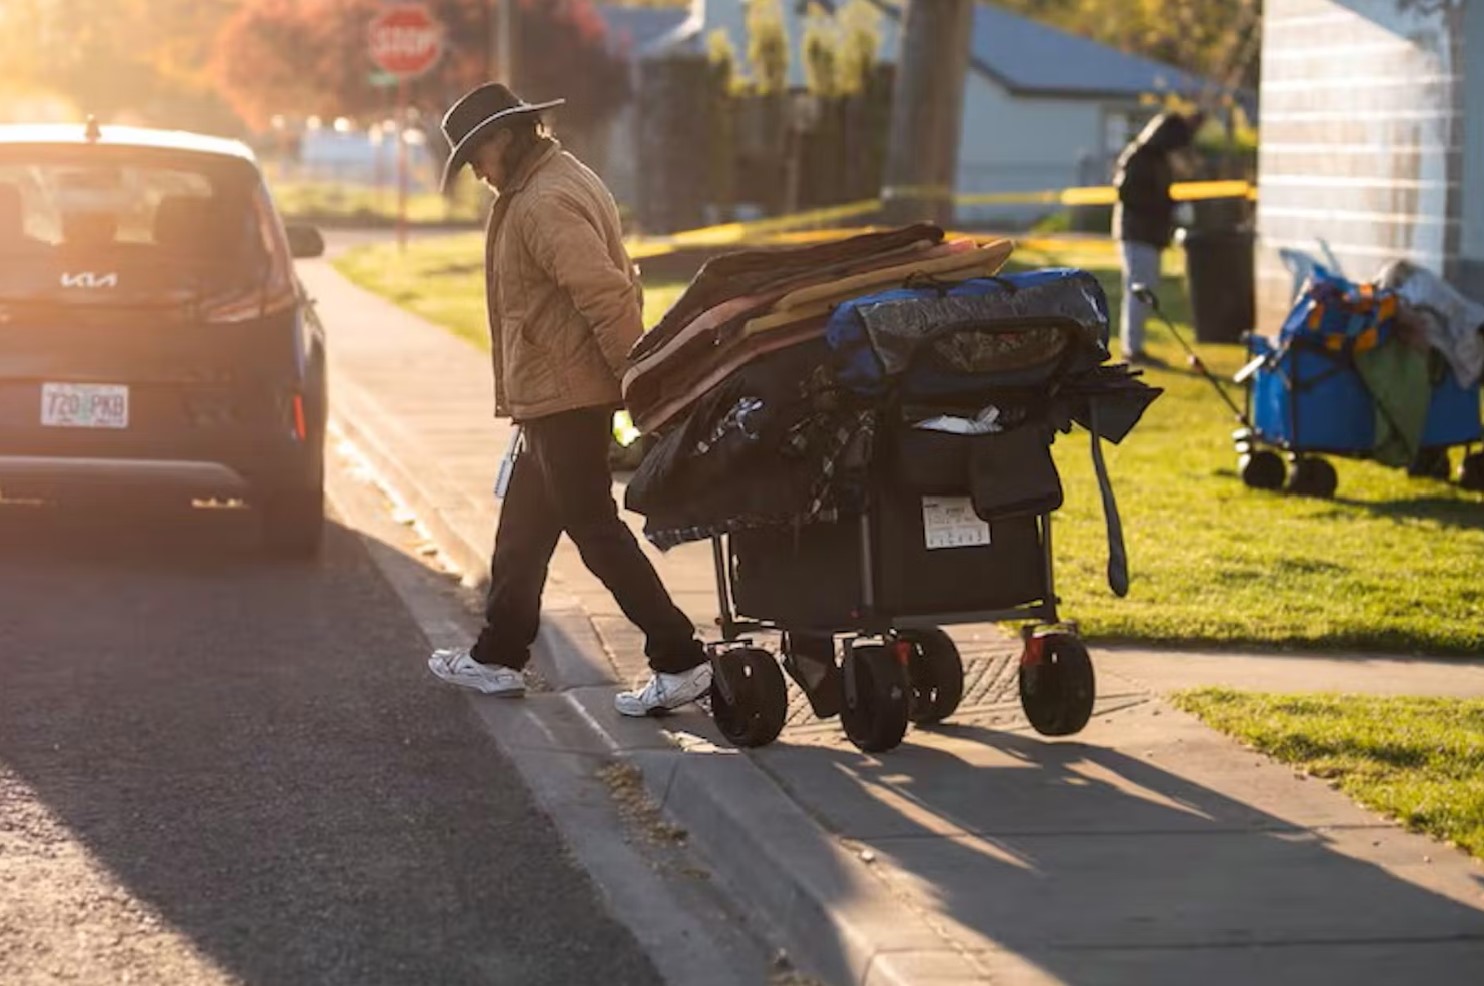 Every morning, John Parke packs up his tent and sleeping bag, piles them onto his wagon, and hauls all of his belongings off the grass at Foster Park, before the sprinklers go off at 8 a.m.